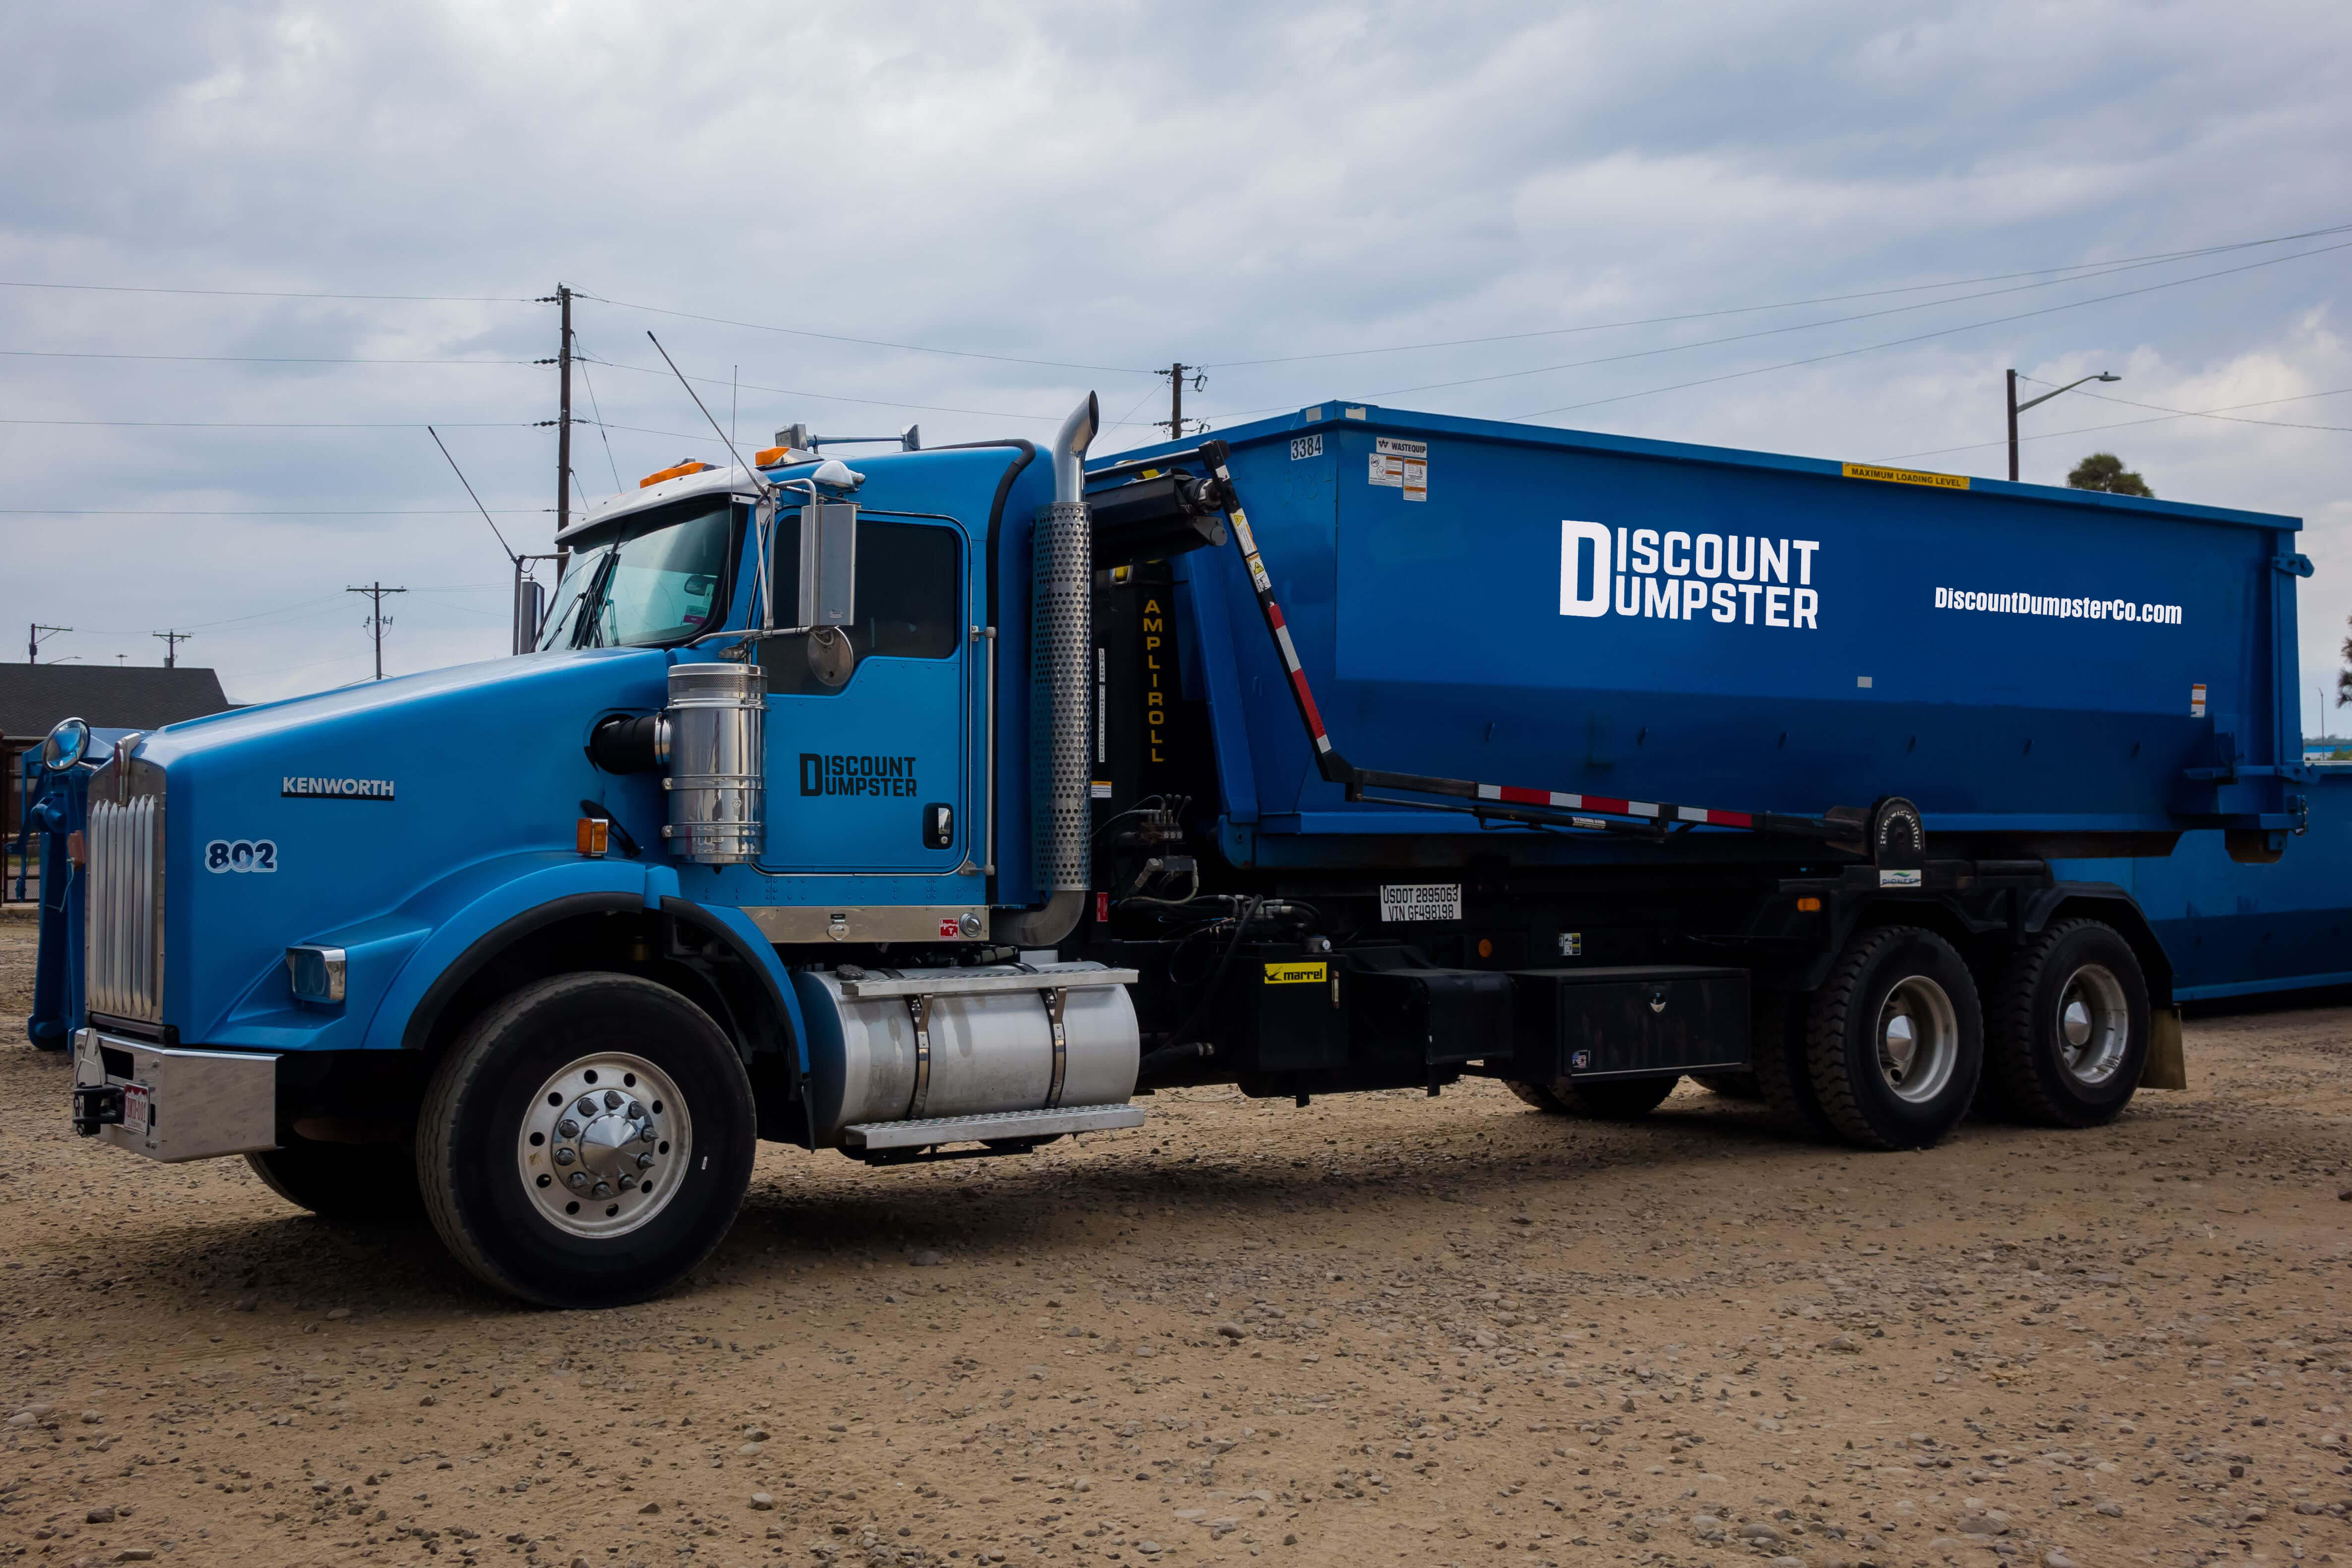 Discount dumpster has roll off dumpster and waste removal services in Denver co